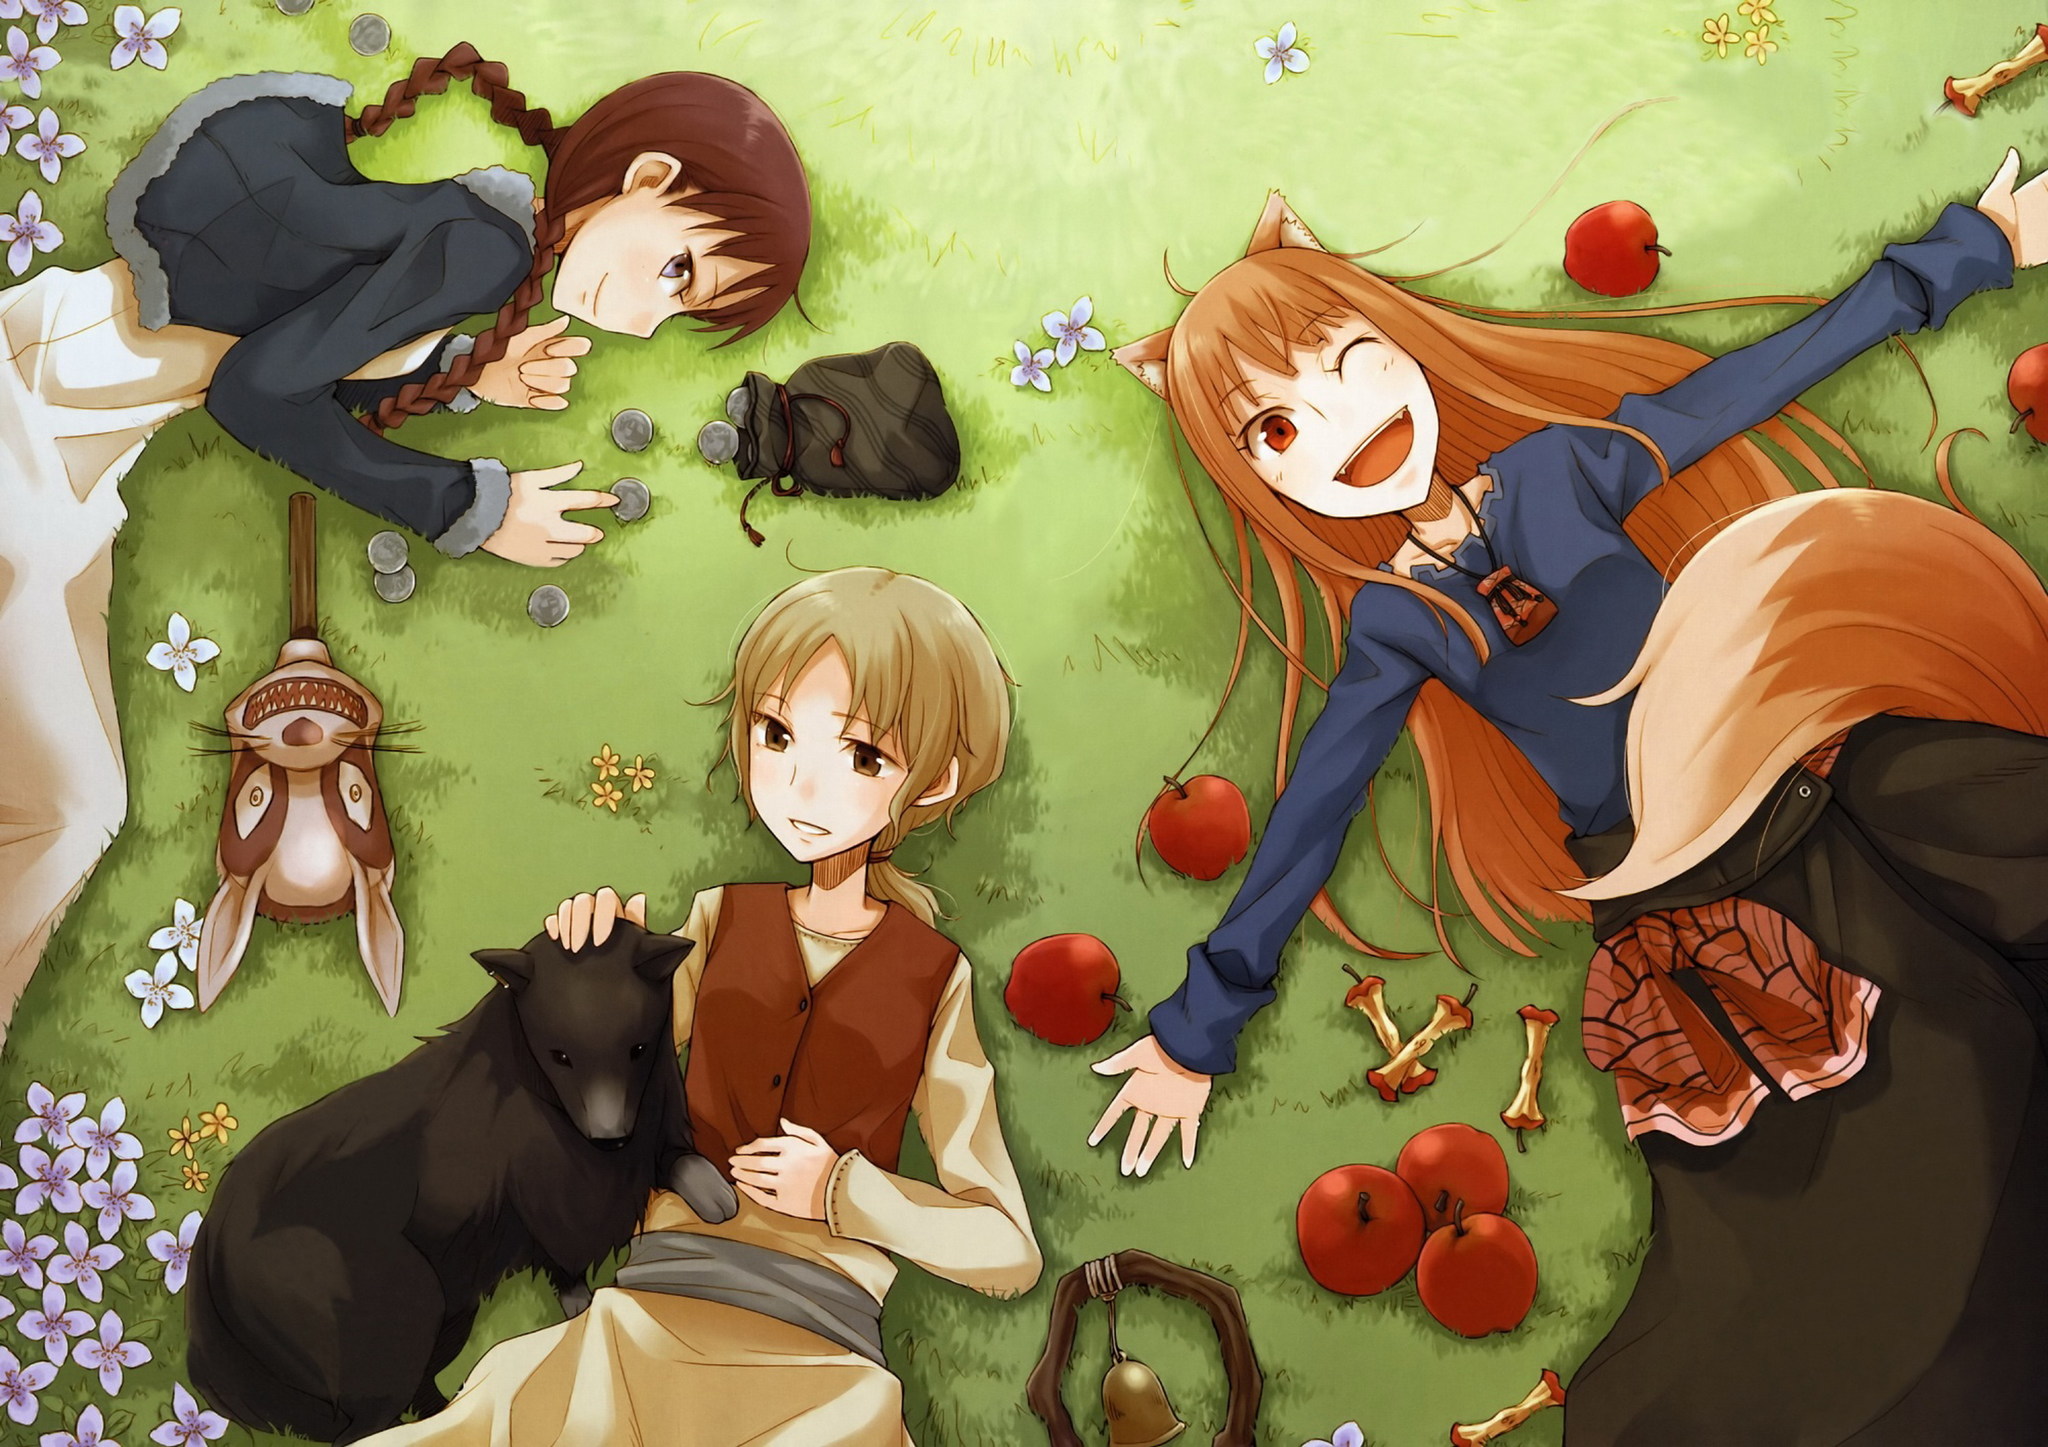 She-wolf and parchment - Anime art, Anime, Myuri, Horo holo, Kraft lawrence, Nora Arendt, Spice and Wolf, She-wolf and parchment, Animal ears, Longpost, Holo